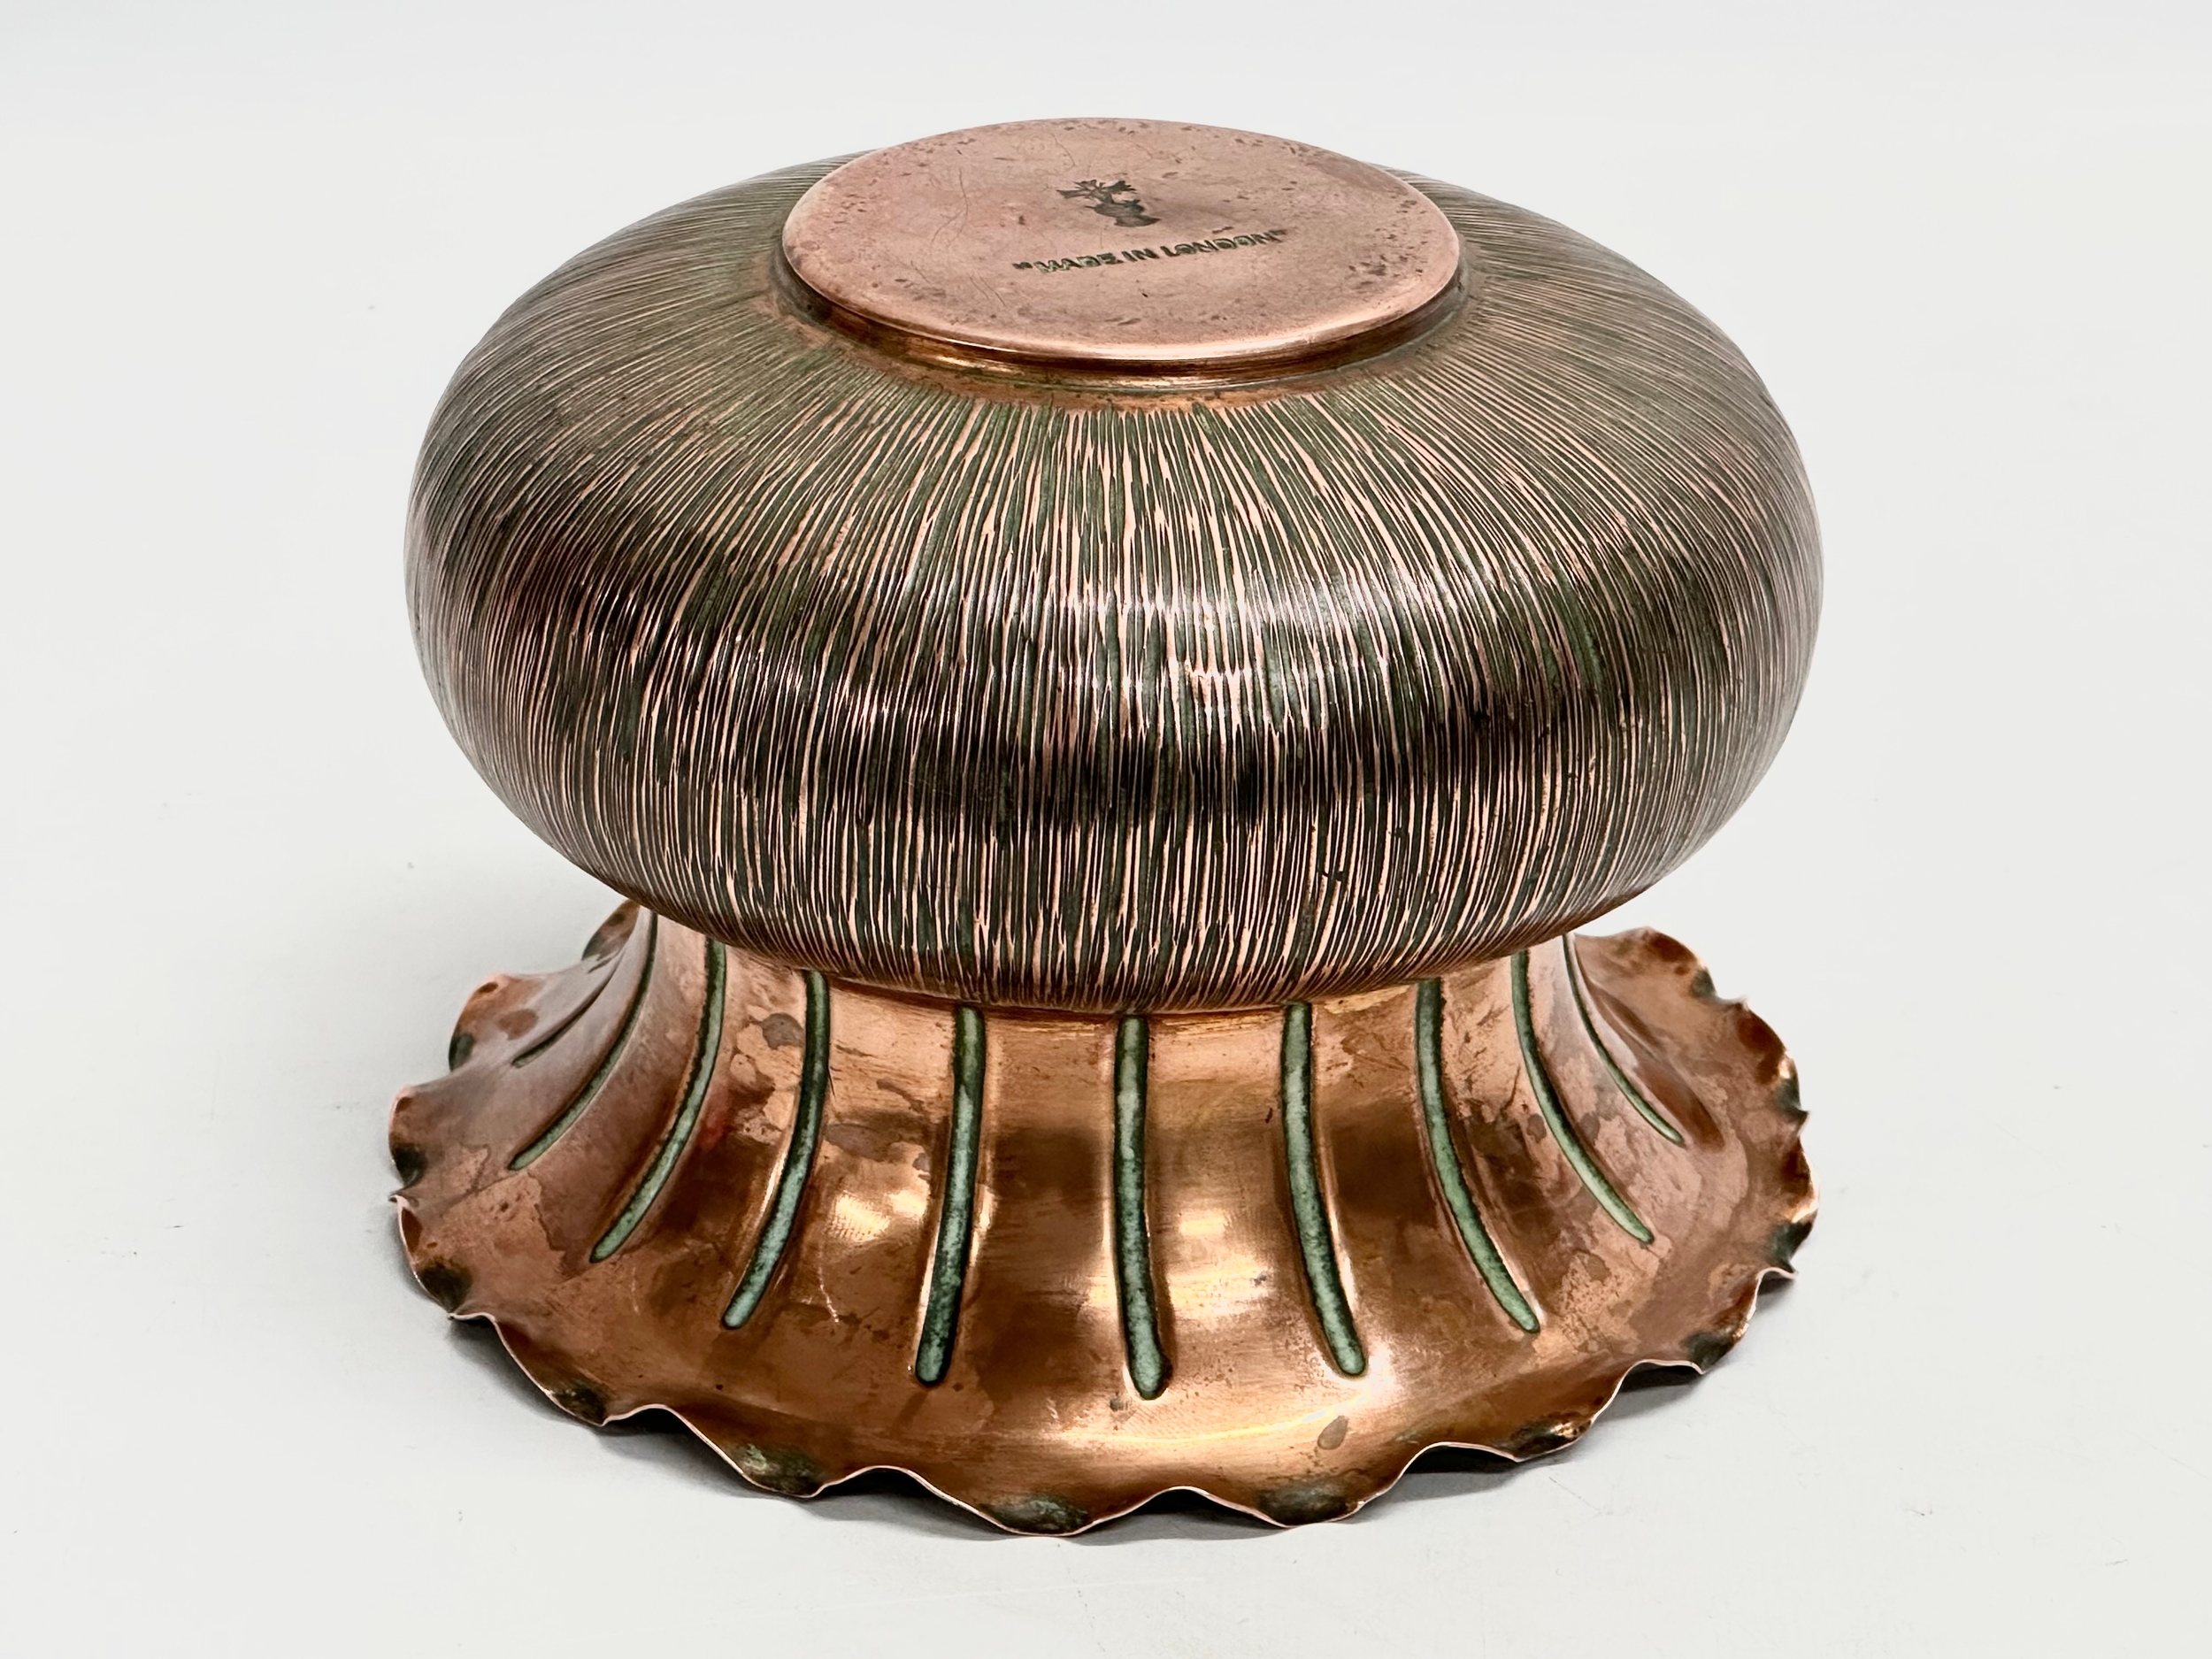 Christopher Dresser. An early 20th century copper jardiniere designed by Christopher Dresser for - Image 3 of 4